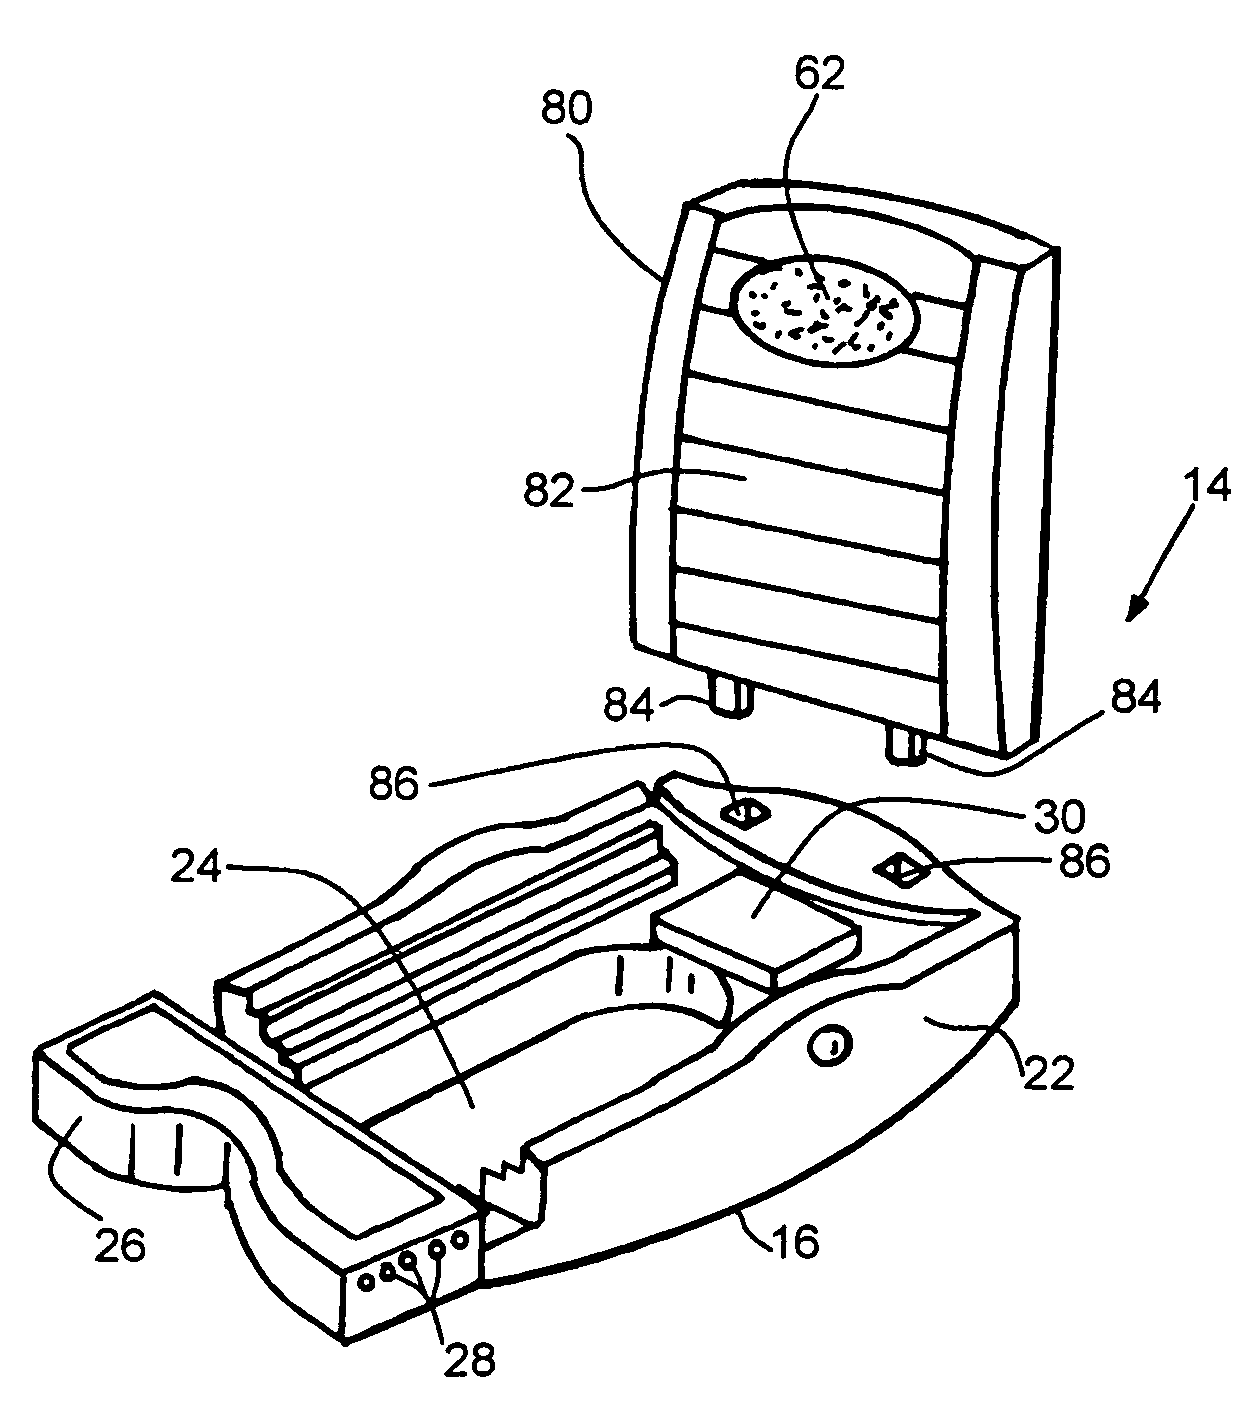 Infant seat base with vehicle travel simulation means for mounting a vehicle infant seat